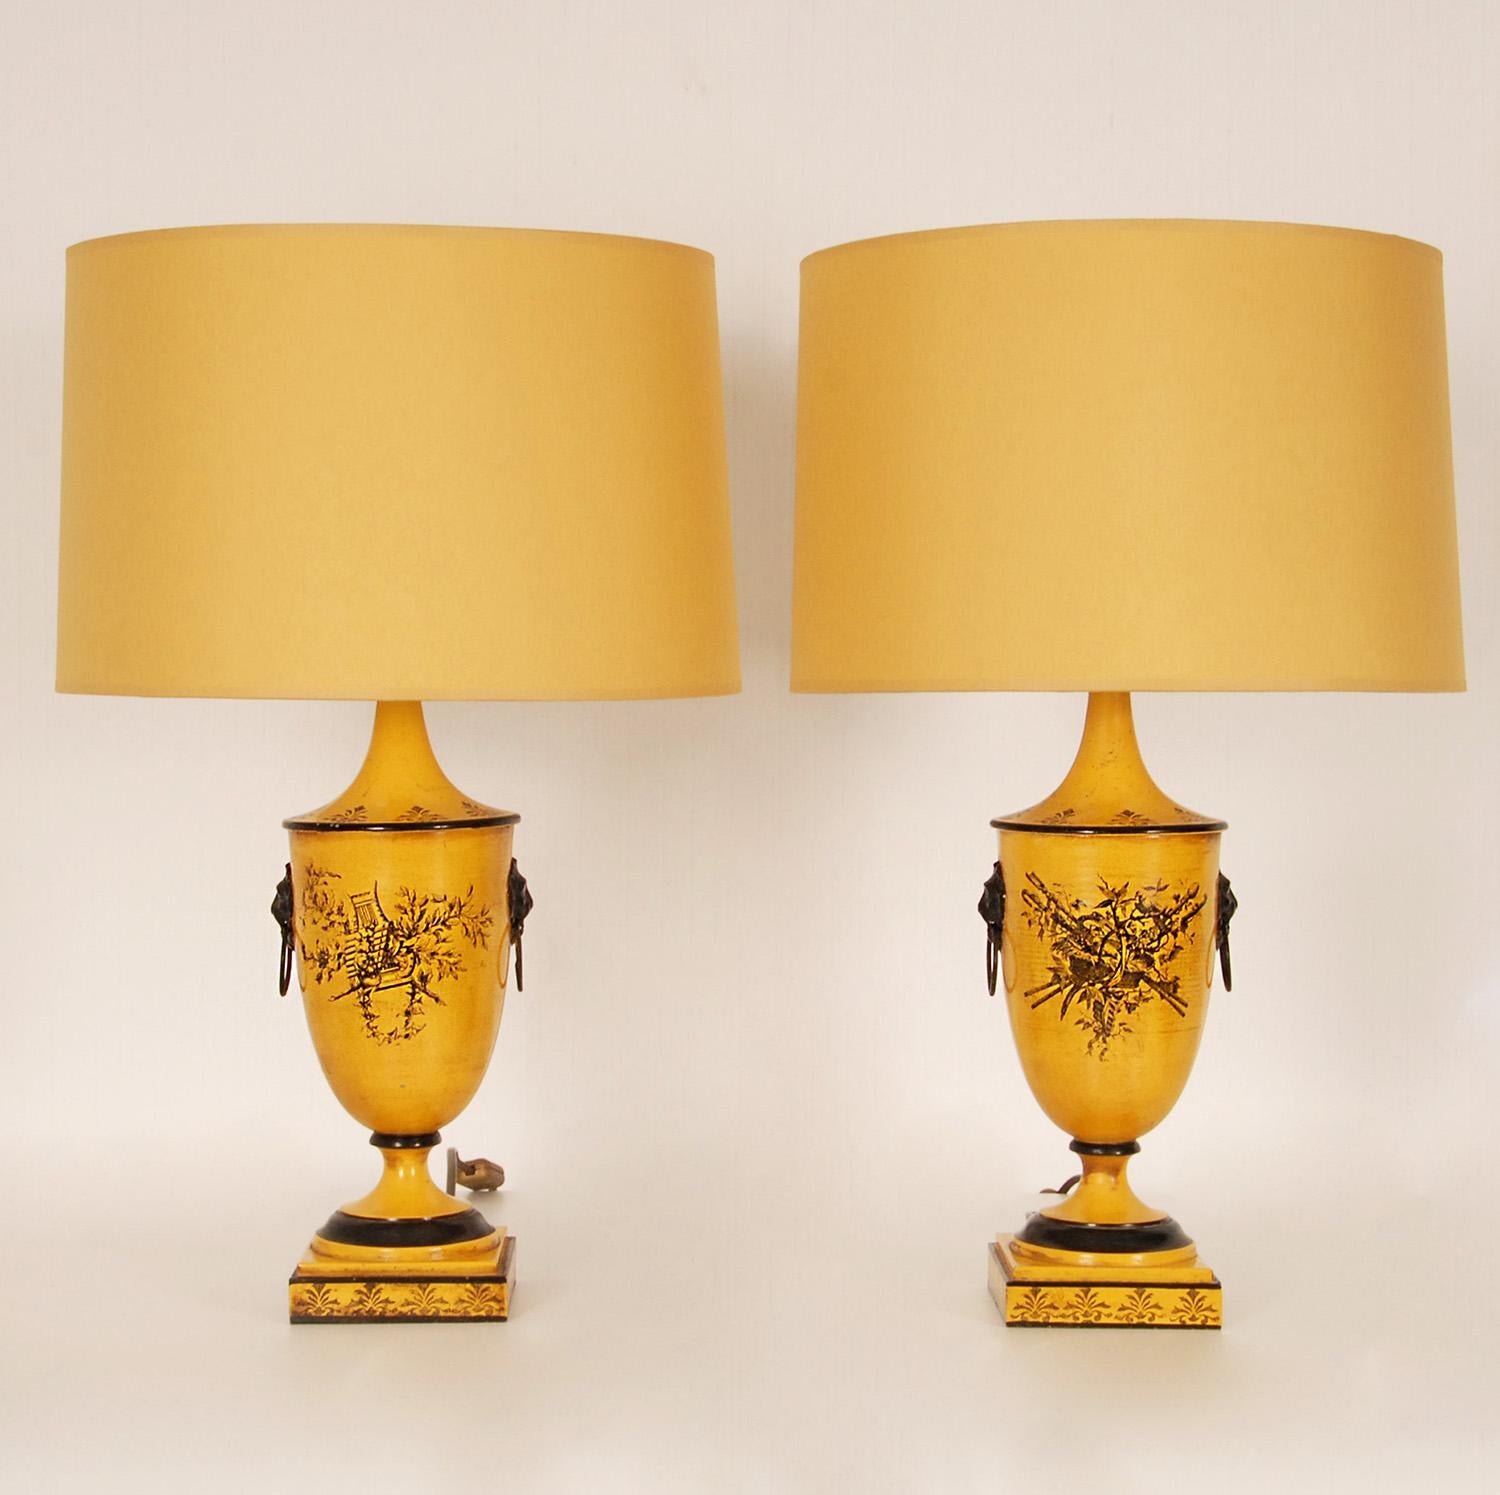  pair vintage 1960s traditional Italian tole lamps with matching lampshades.
Material: Tole and fabric
Style: Traditional Italian, French Country, French provincial, Louis XVI, Neoclassical, Vintage, Mid Century, Traditional, Classic
Design: In the